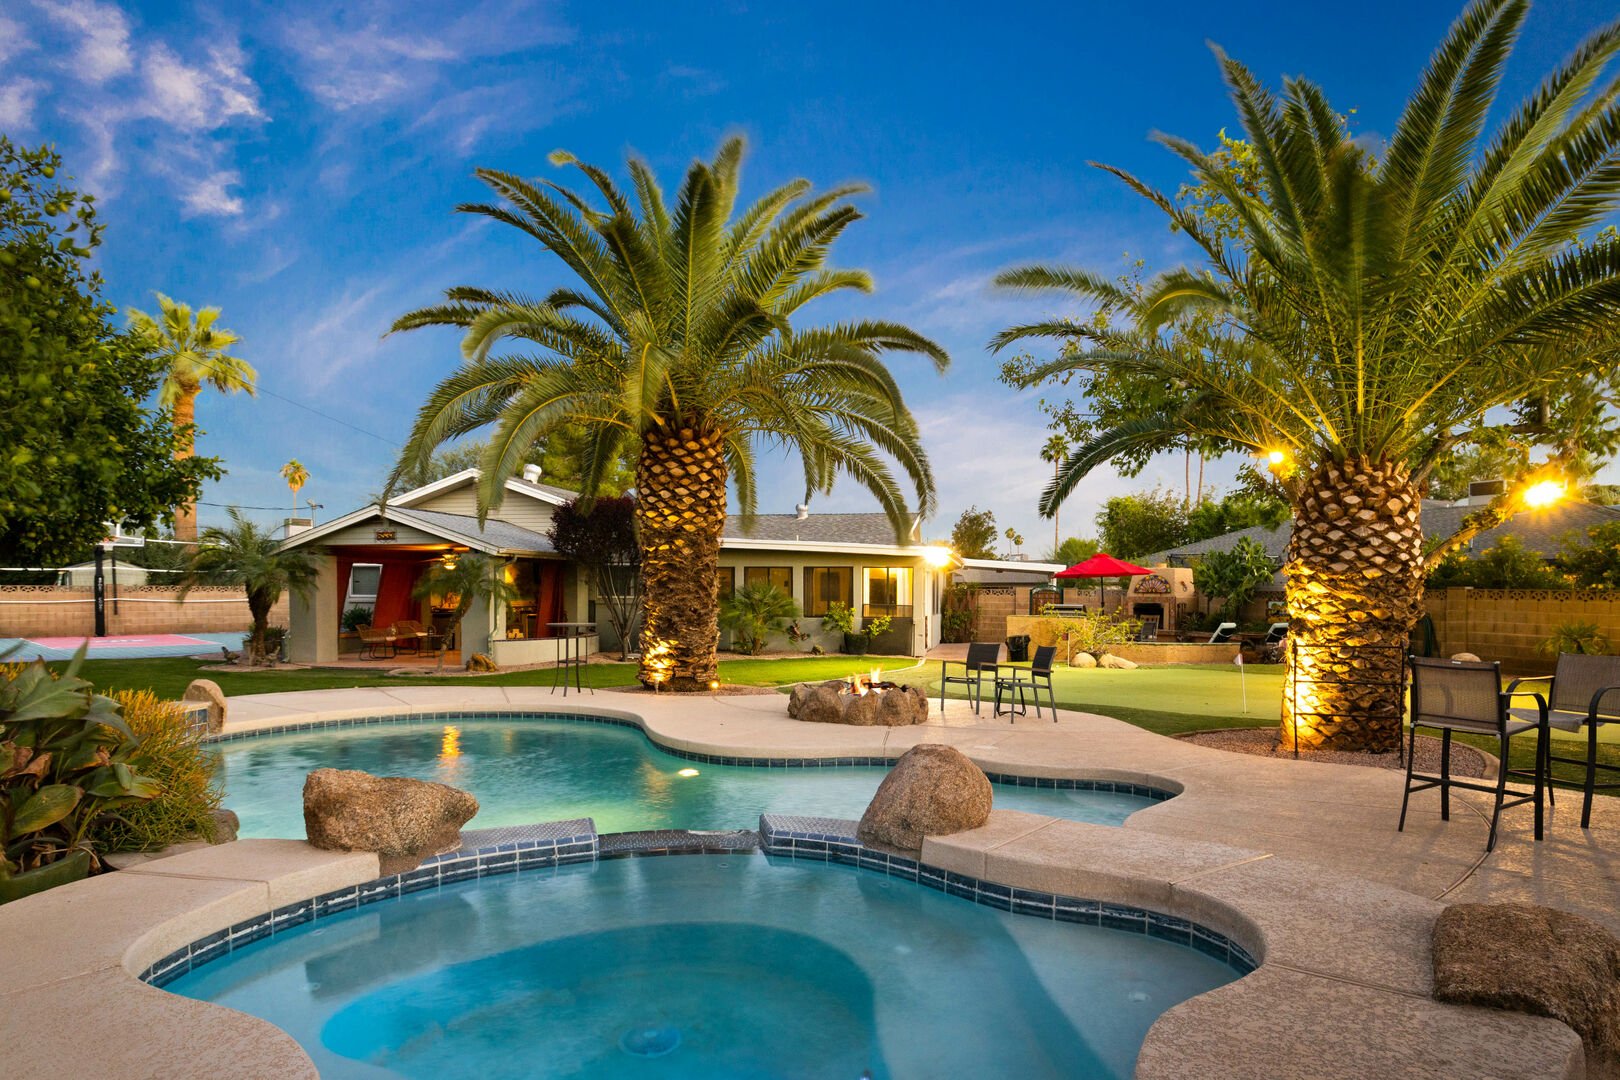 backyard with pool and palm trees